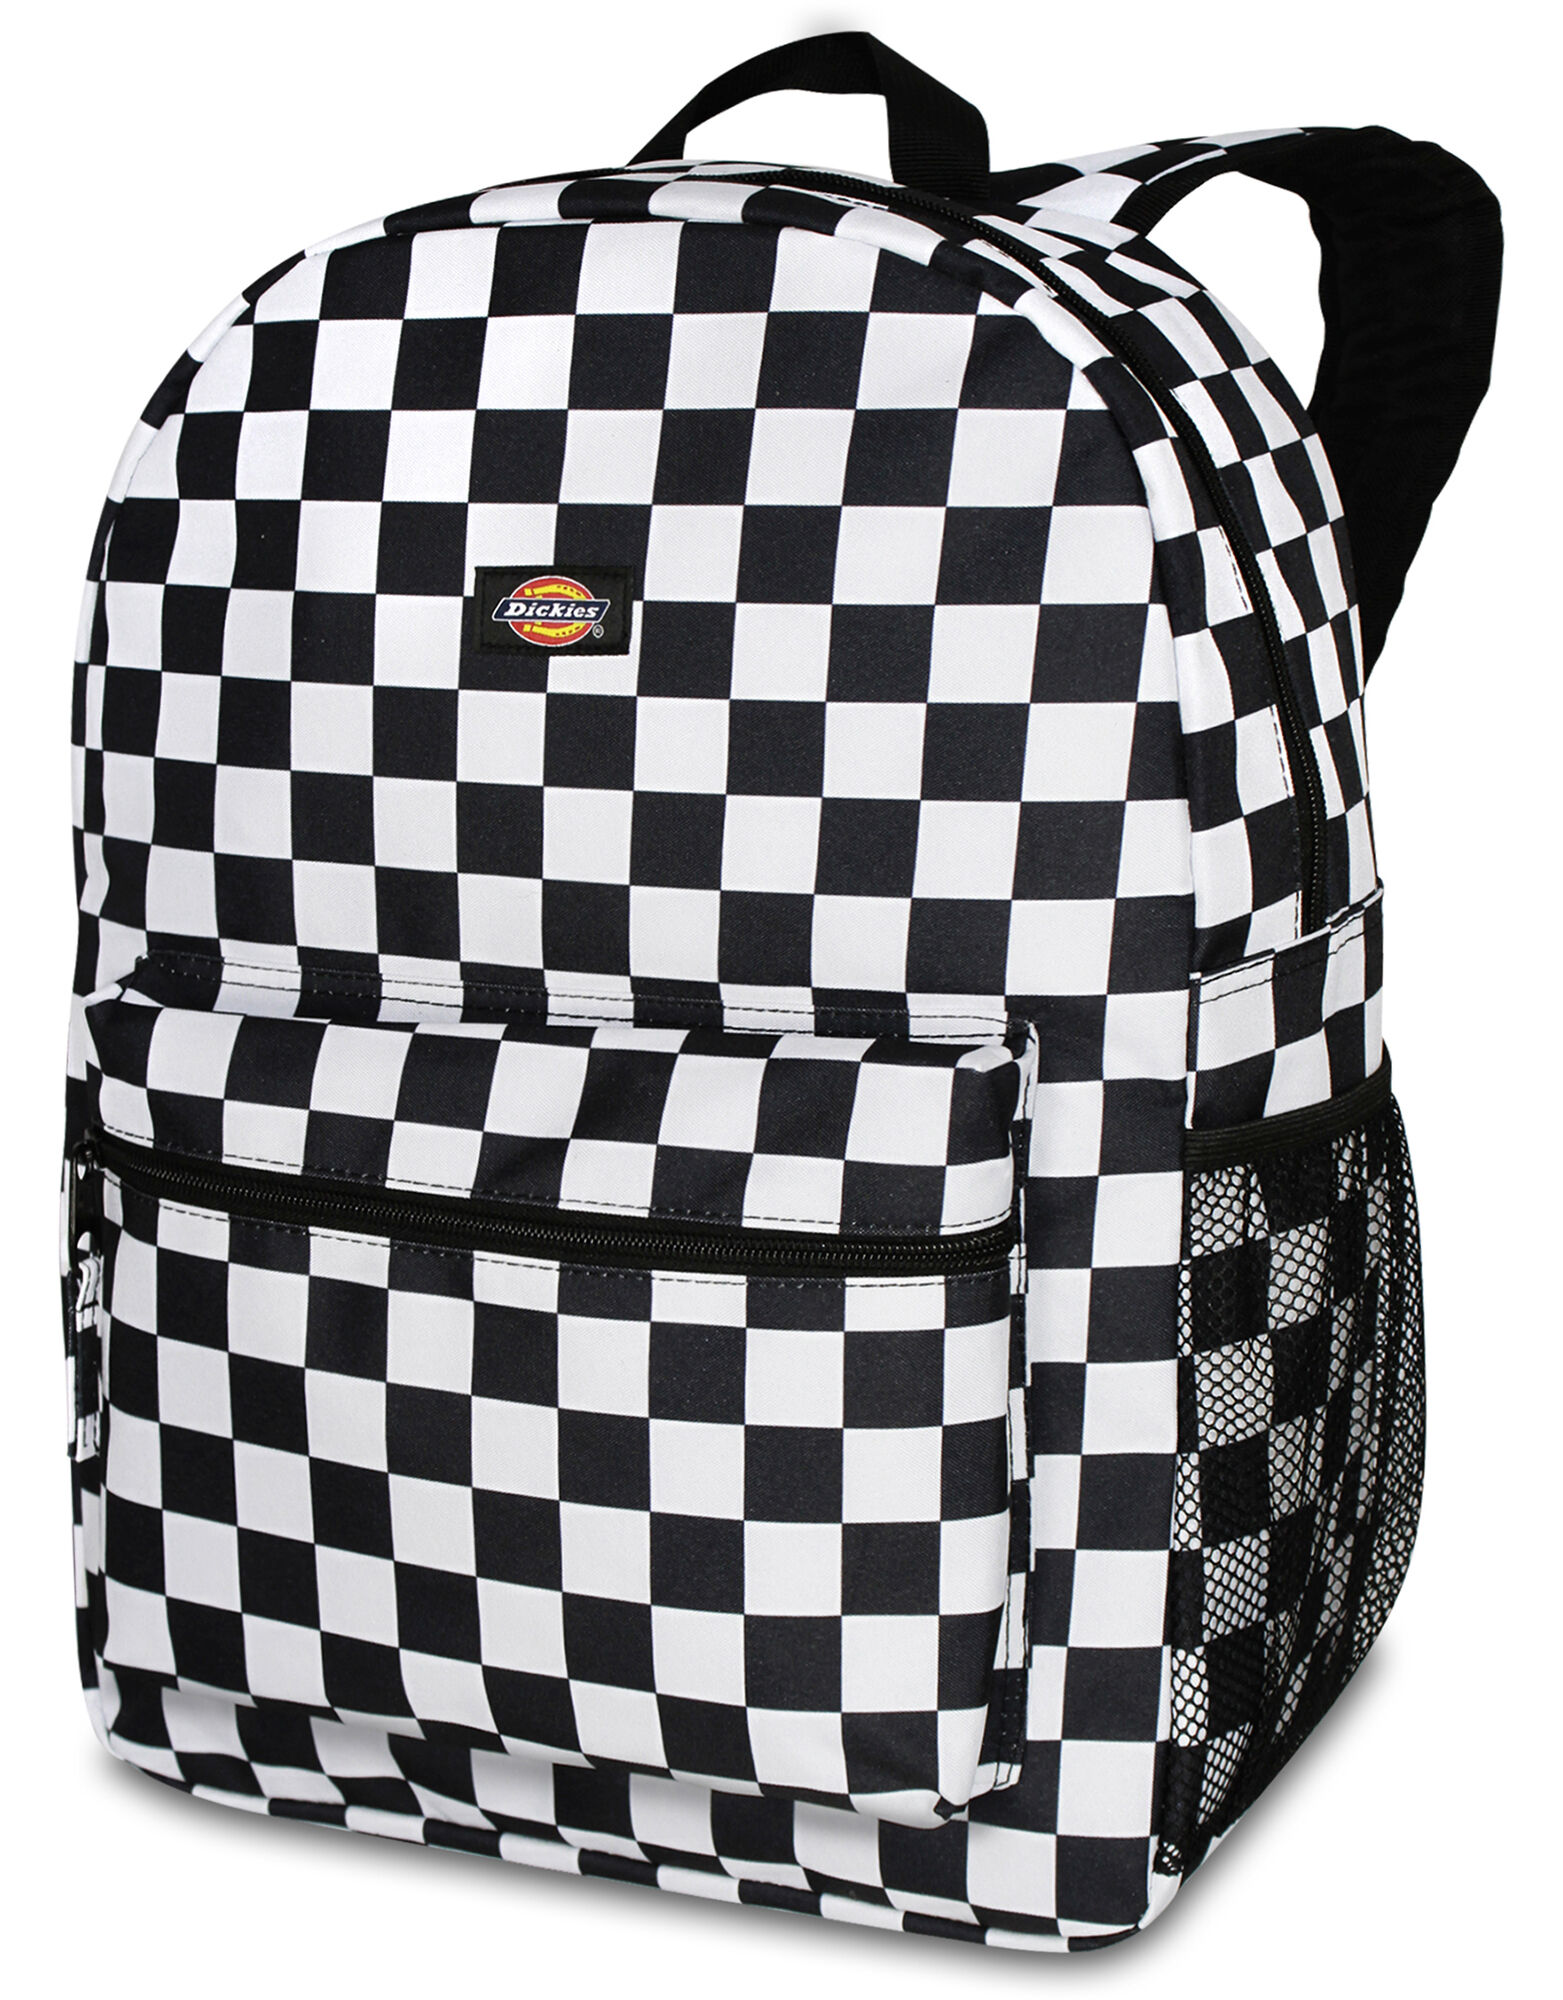 Black/White Checkered Student Backpack Black White Checkered | Accessories Bags Backpacks | Dickies